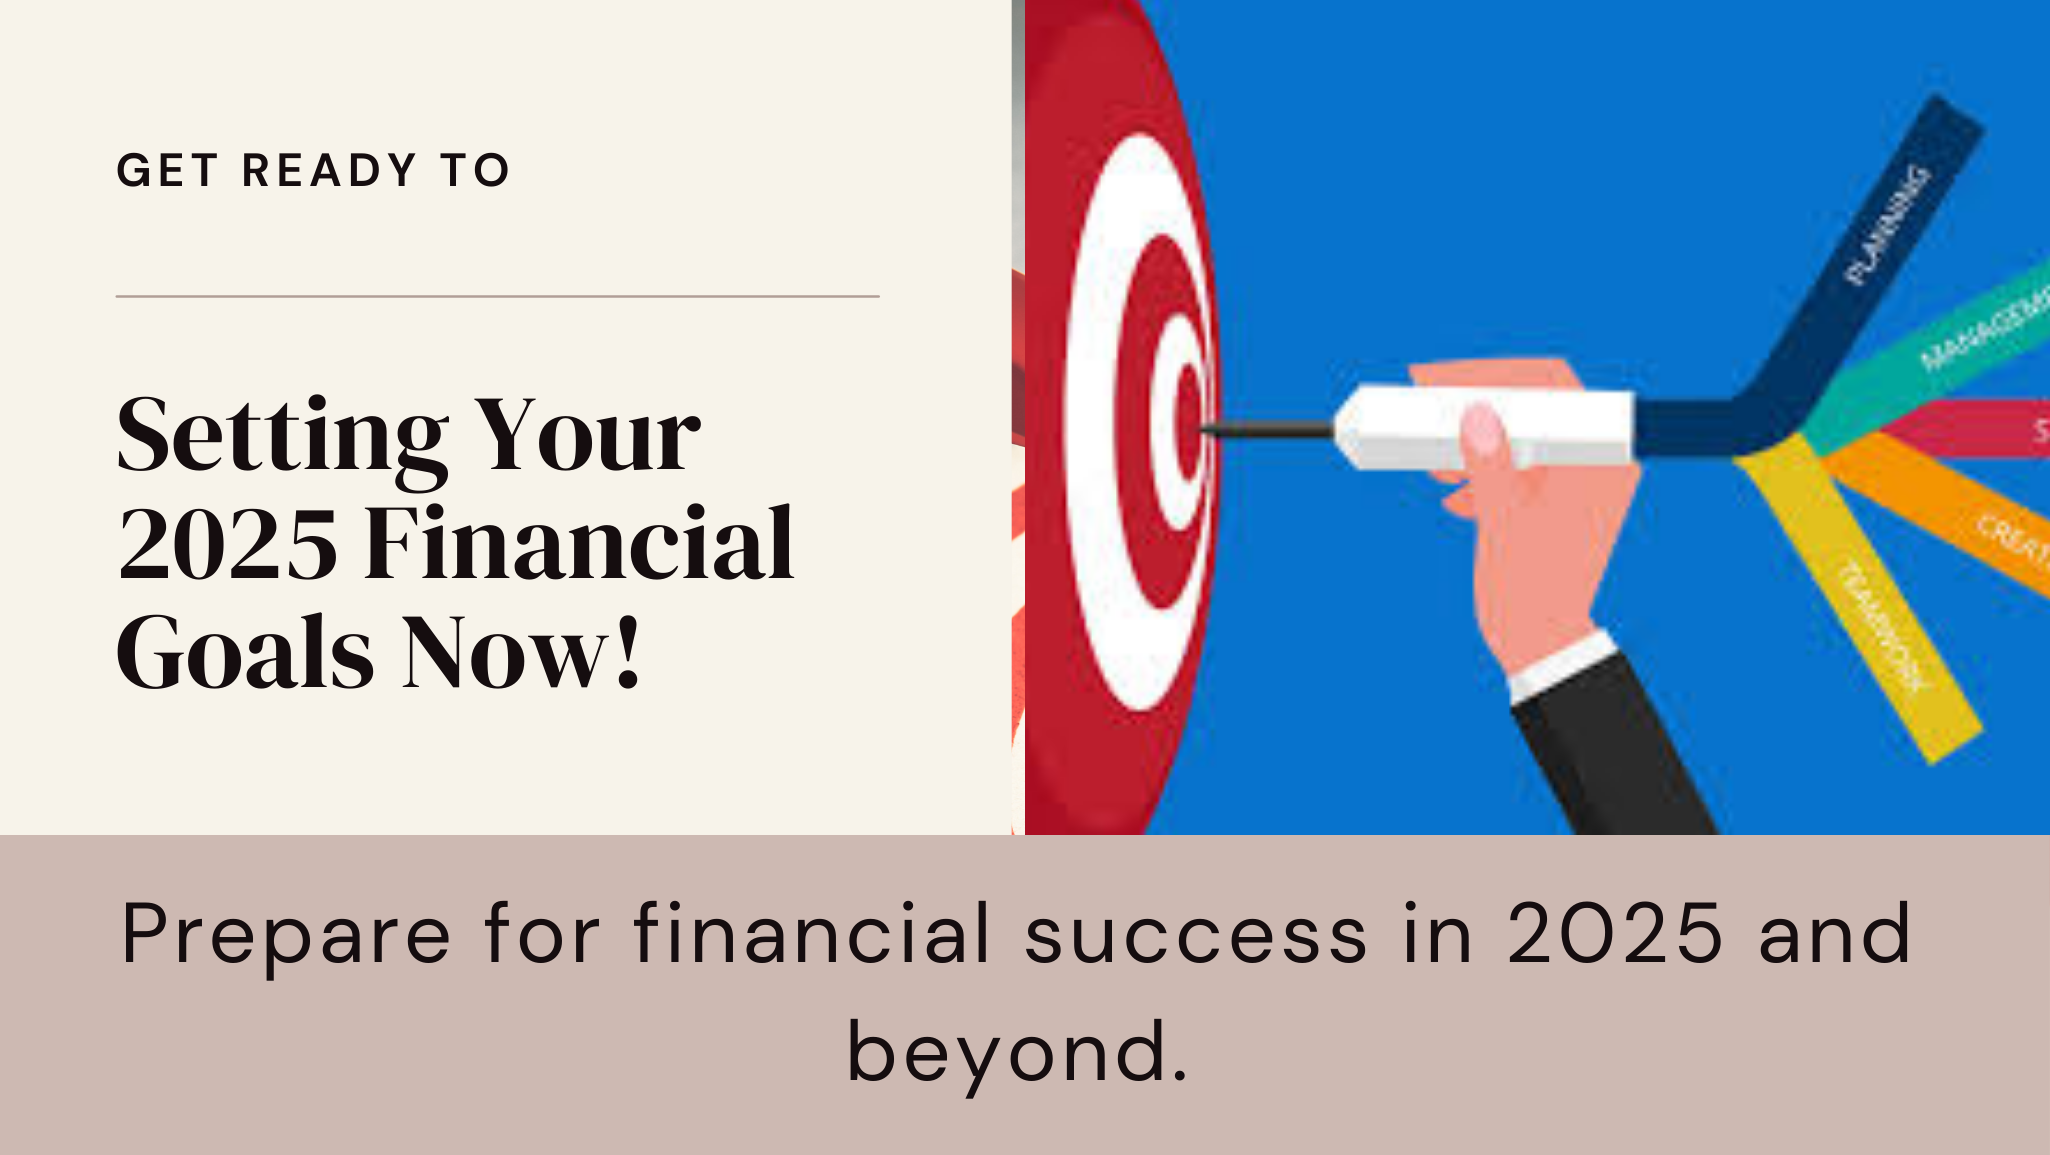 Do you want to Set 2025 personal financial goals?